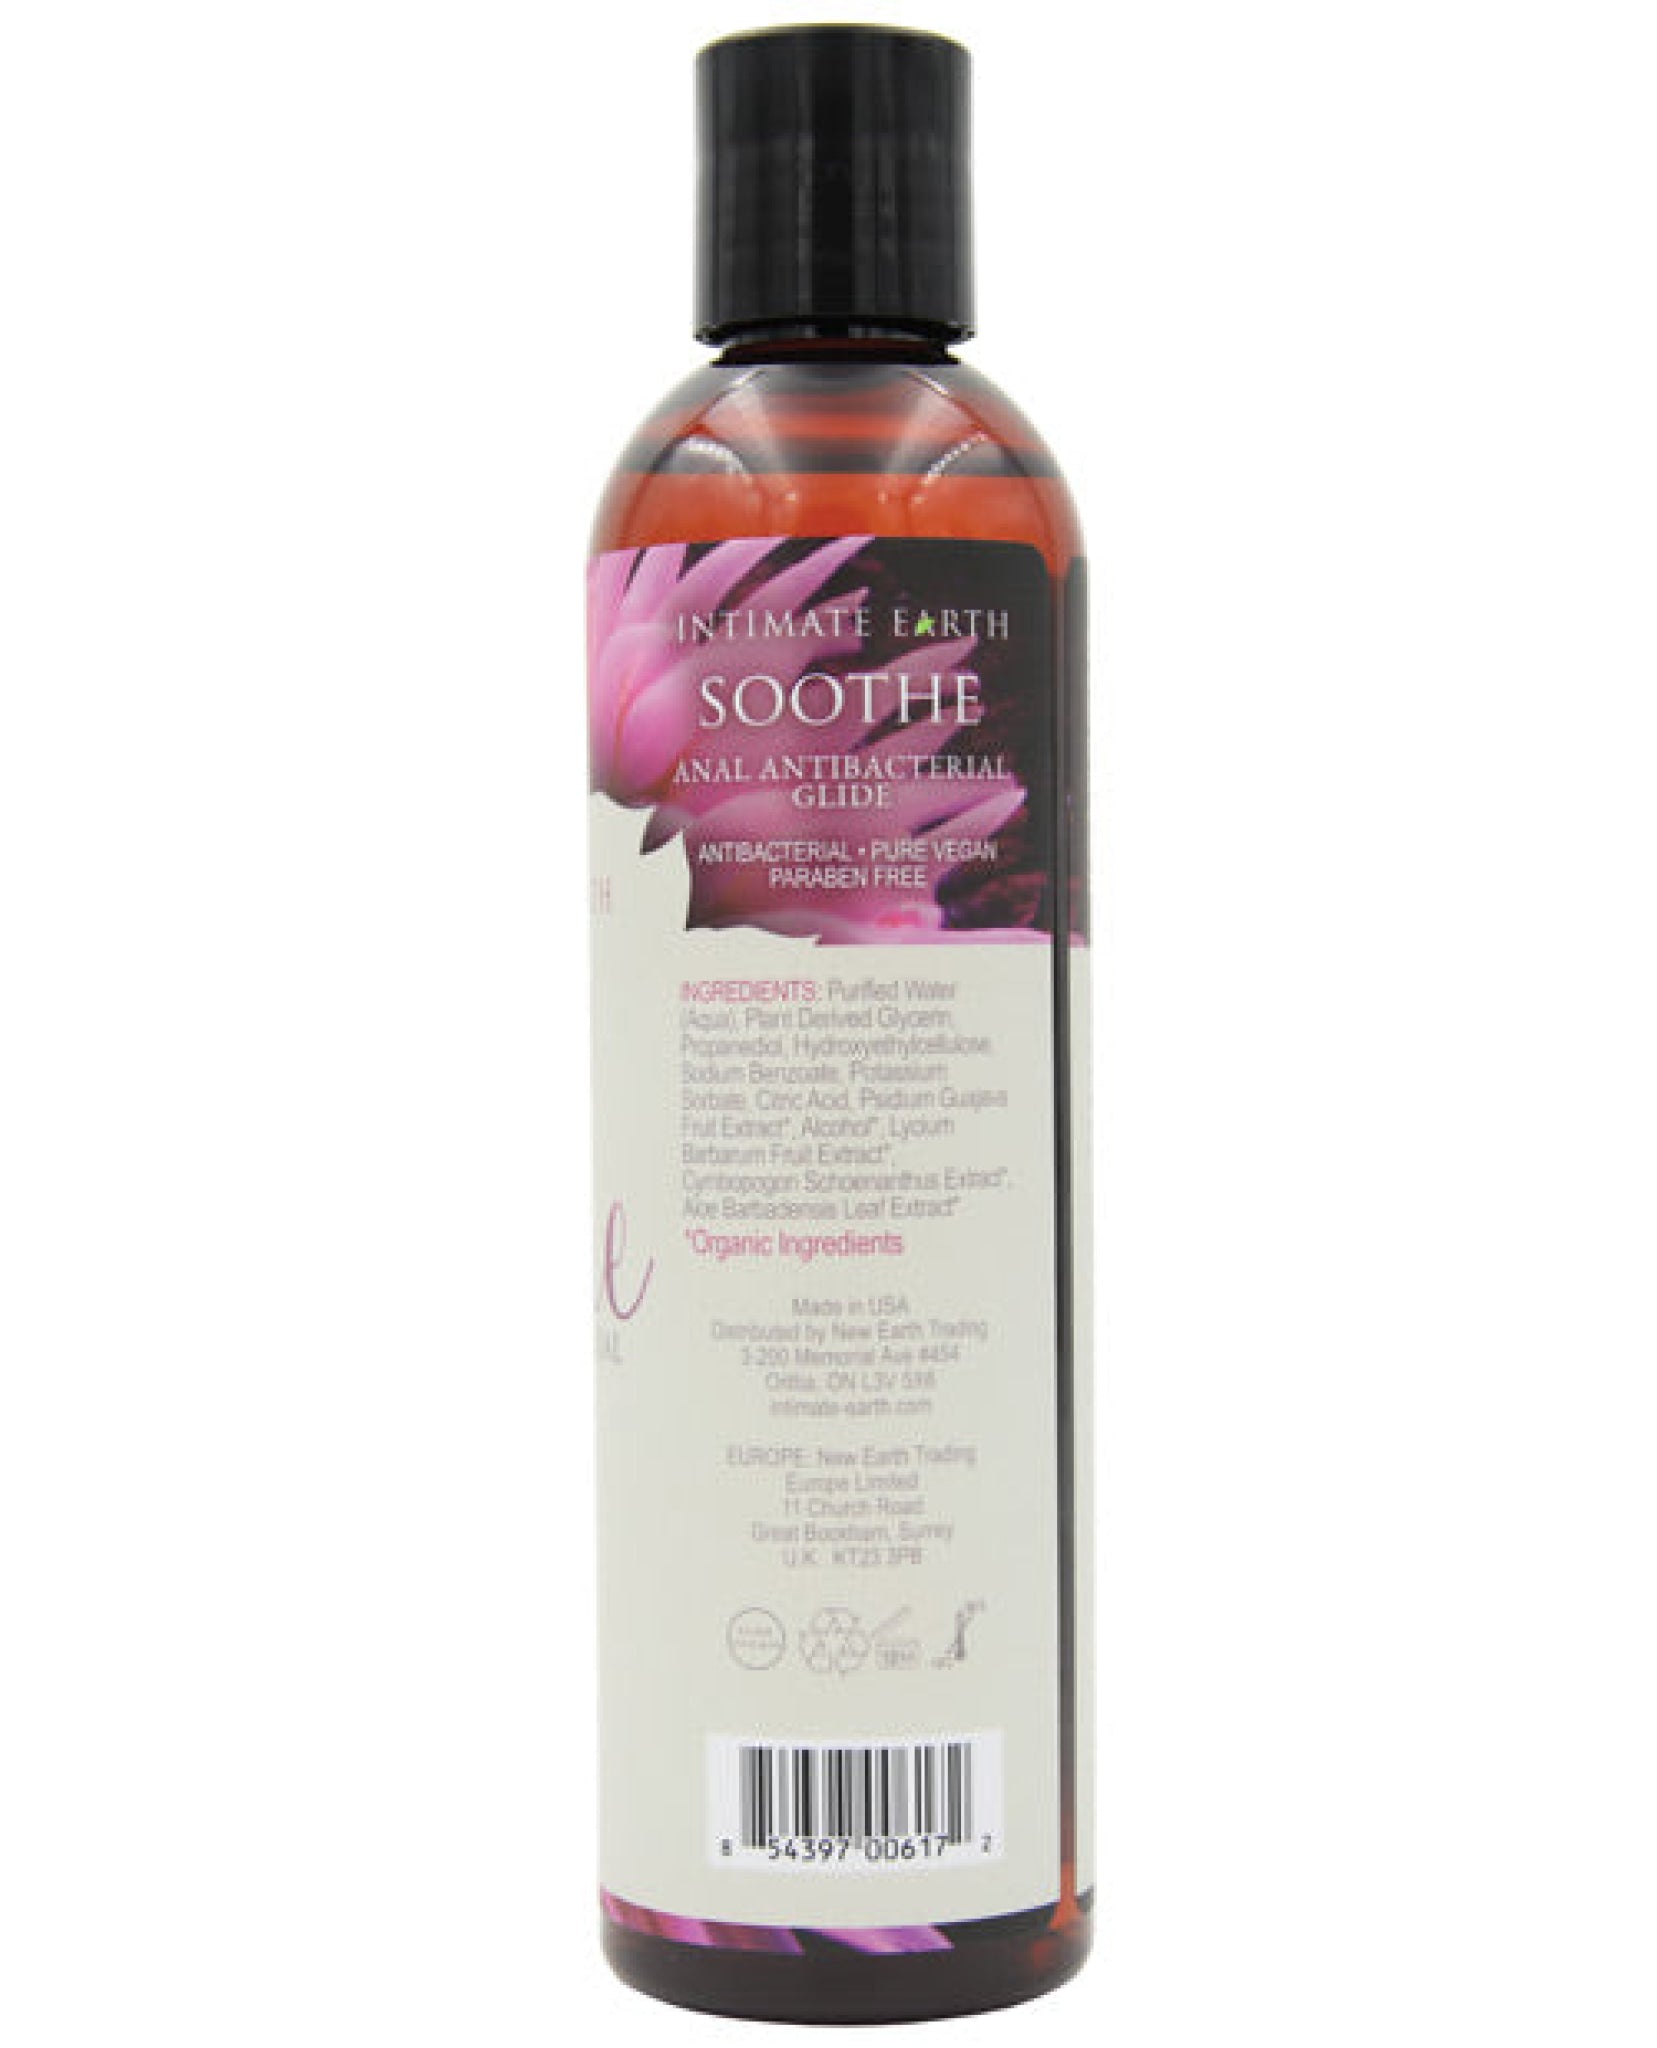 Intimate Earth Soothe Anti-bacterial Anal Lubricant Intimate Earth